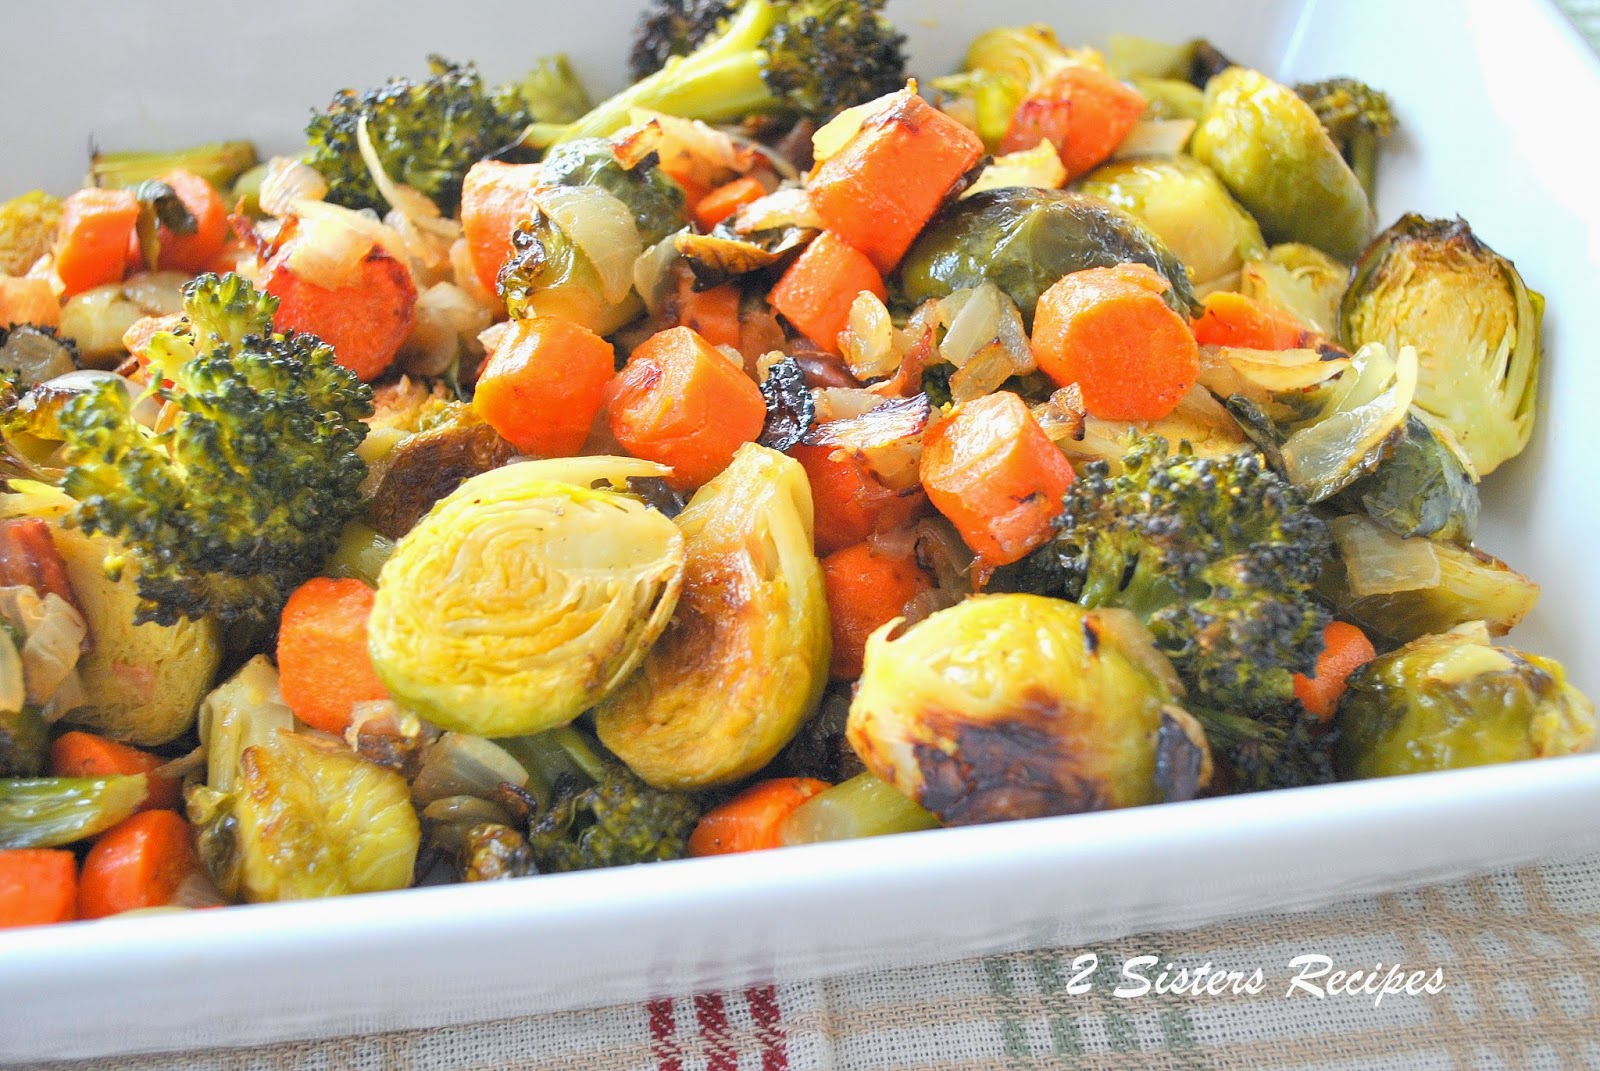 Oven-Roasted Brussels Sprouts, Carrots, Broccoli and Italian Bacon by 2sistersrecipes.com